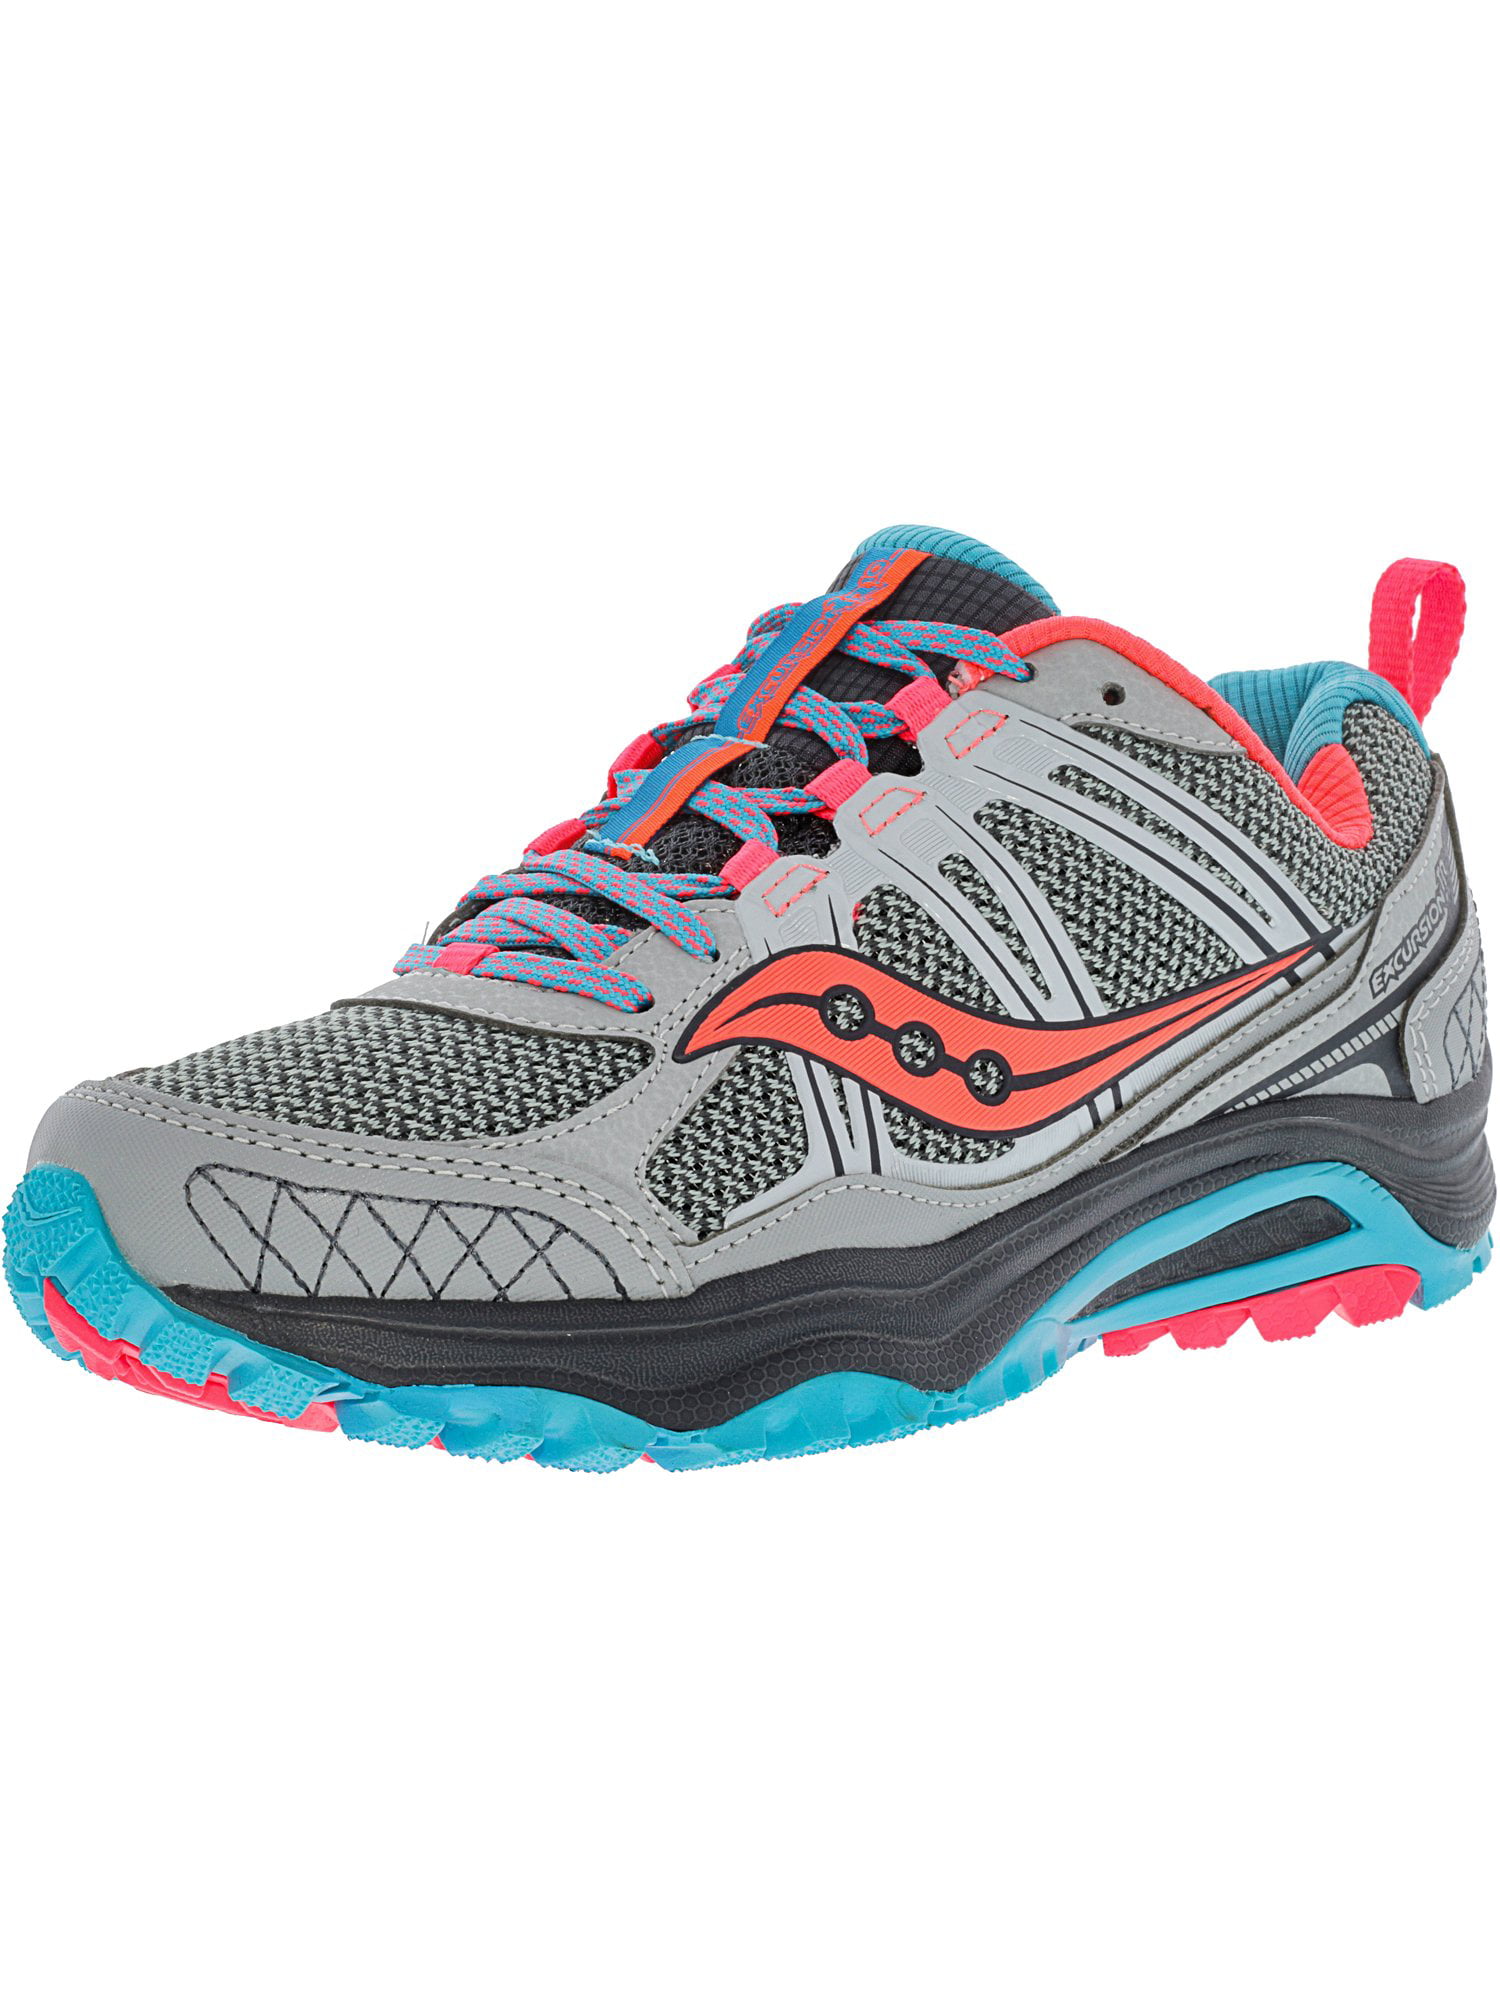 Saucony Women's Grid Excursion Tr10 Grey / Blue Coral Ankle-High ...